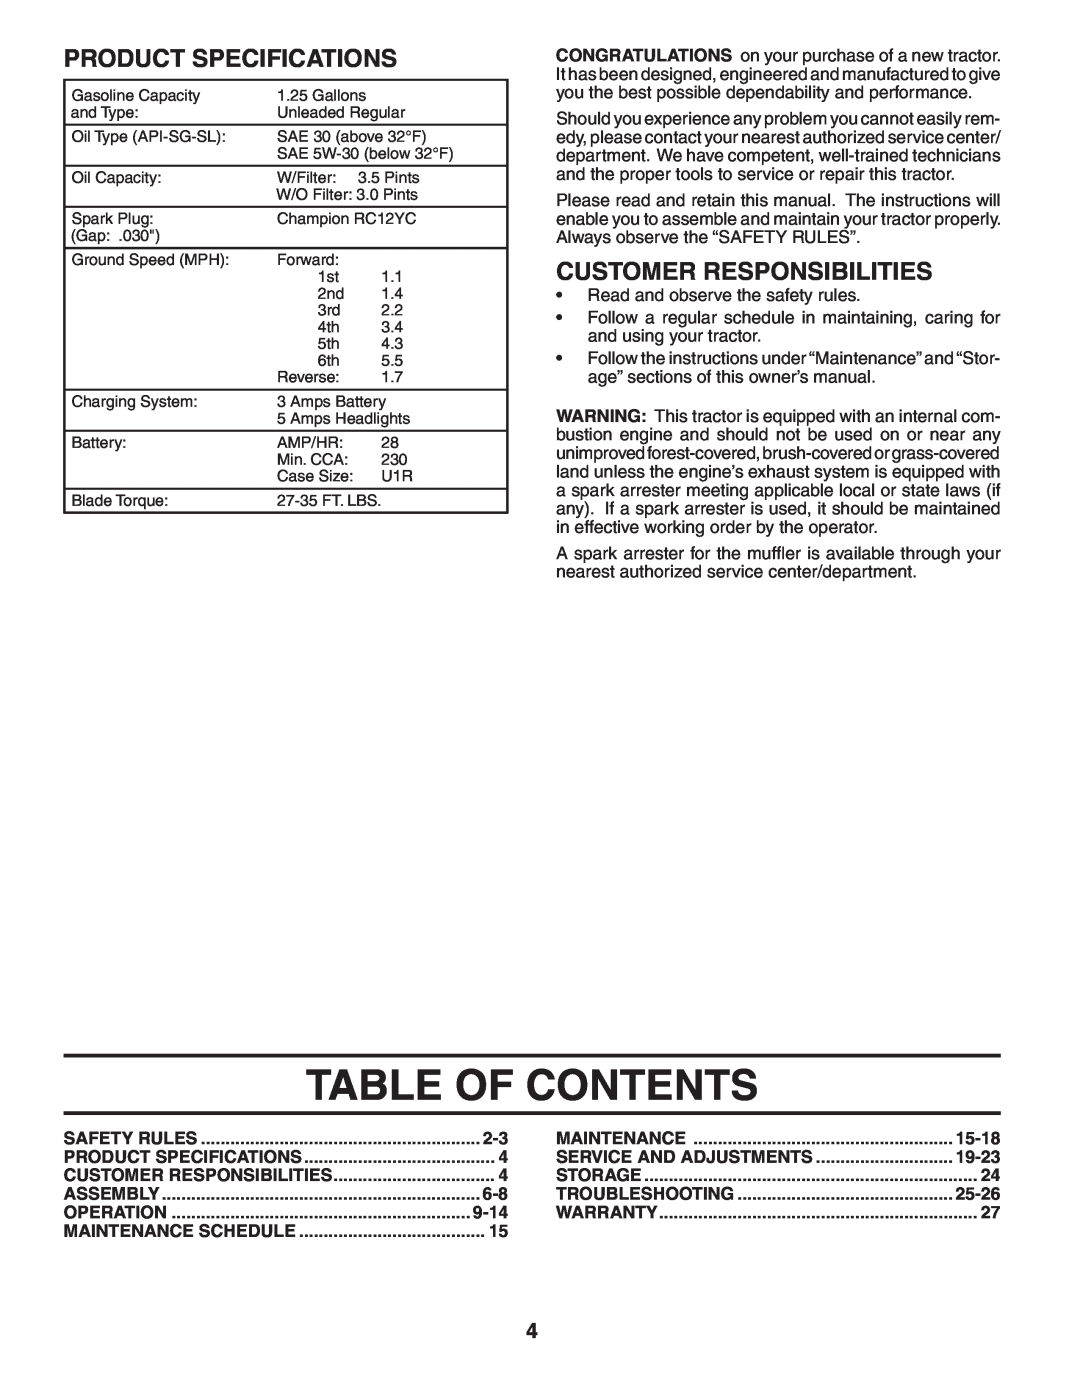 Poulan 403315 manual Table Of Contents, Product Specifications, Customer Responsibilities, 9-14, 15-18, 19-23, 25-26 